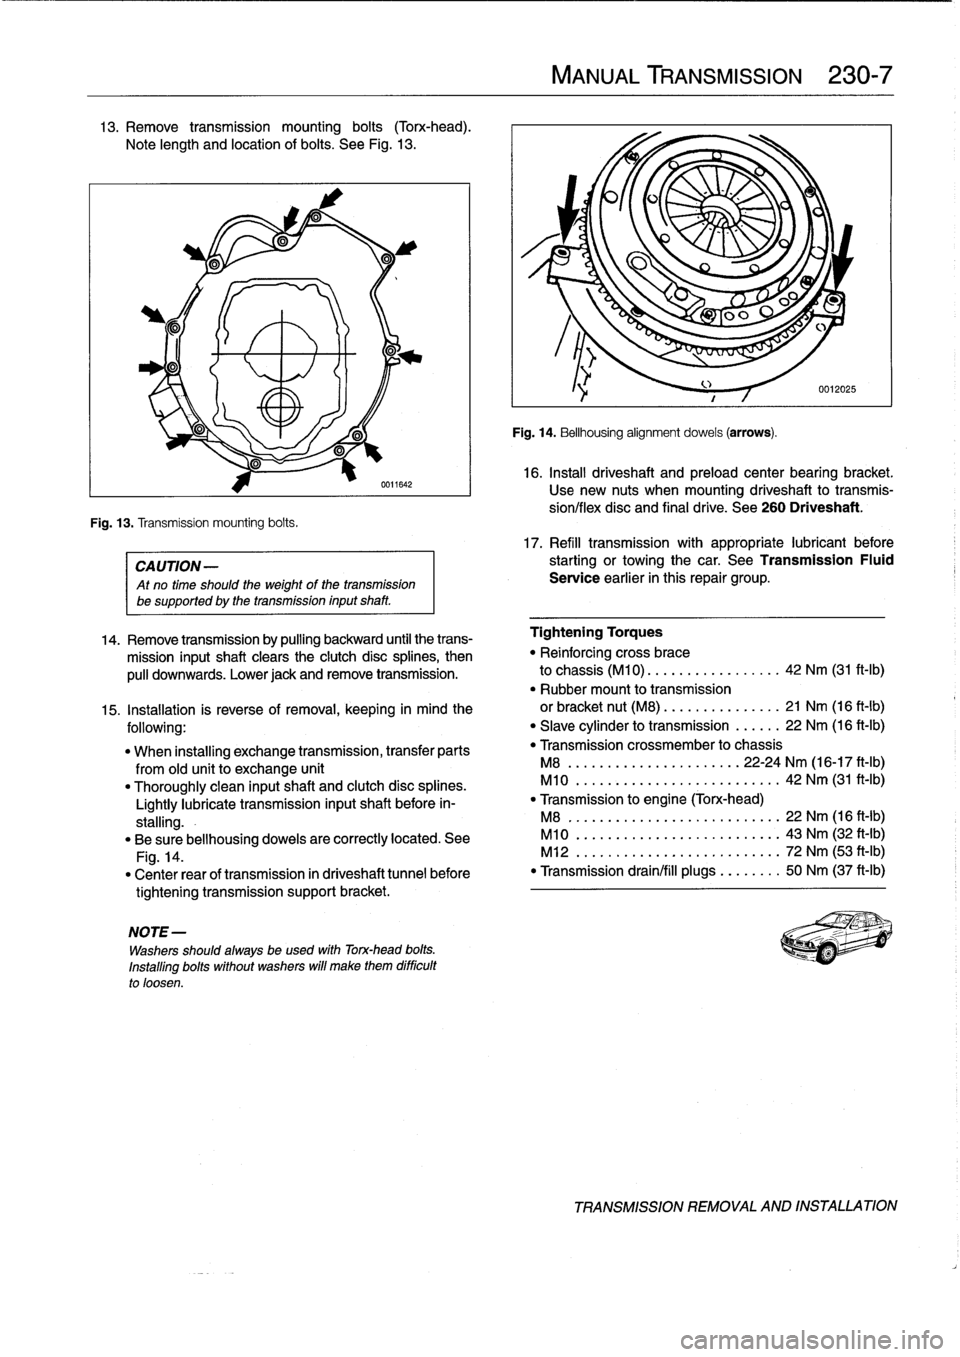 BMW 318i 1998 E36 Workshop Manual 13
.
Remove
transmission
mounting
bolts
(Torx-head)
.

Note
length
and
location
of
bolts
.
See
Fig
.
13
.

Fig
.
13
.
Transmission
mounting
bolts
.

0611642

CA
UTION-

Atno
time
should
the
weight
of
